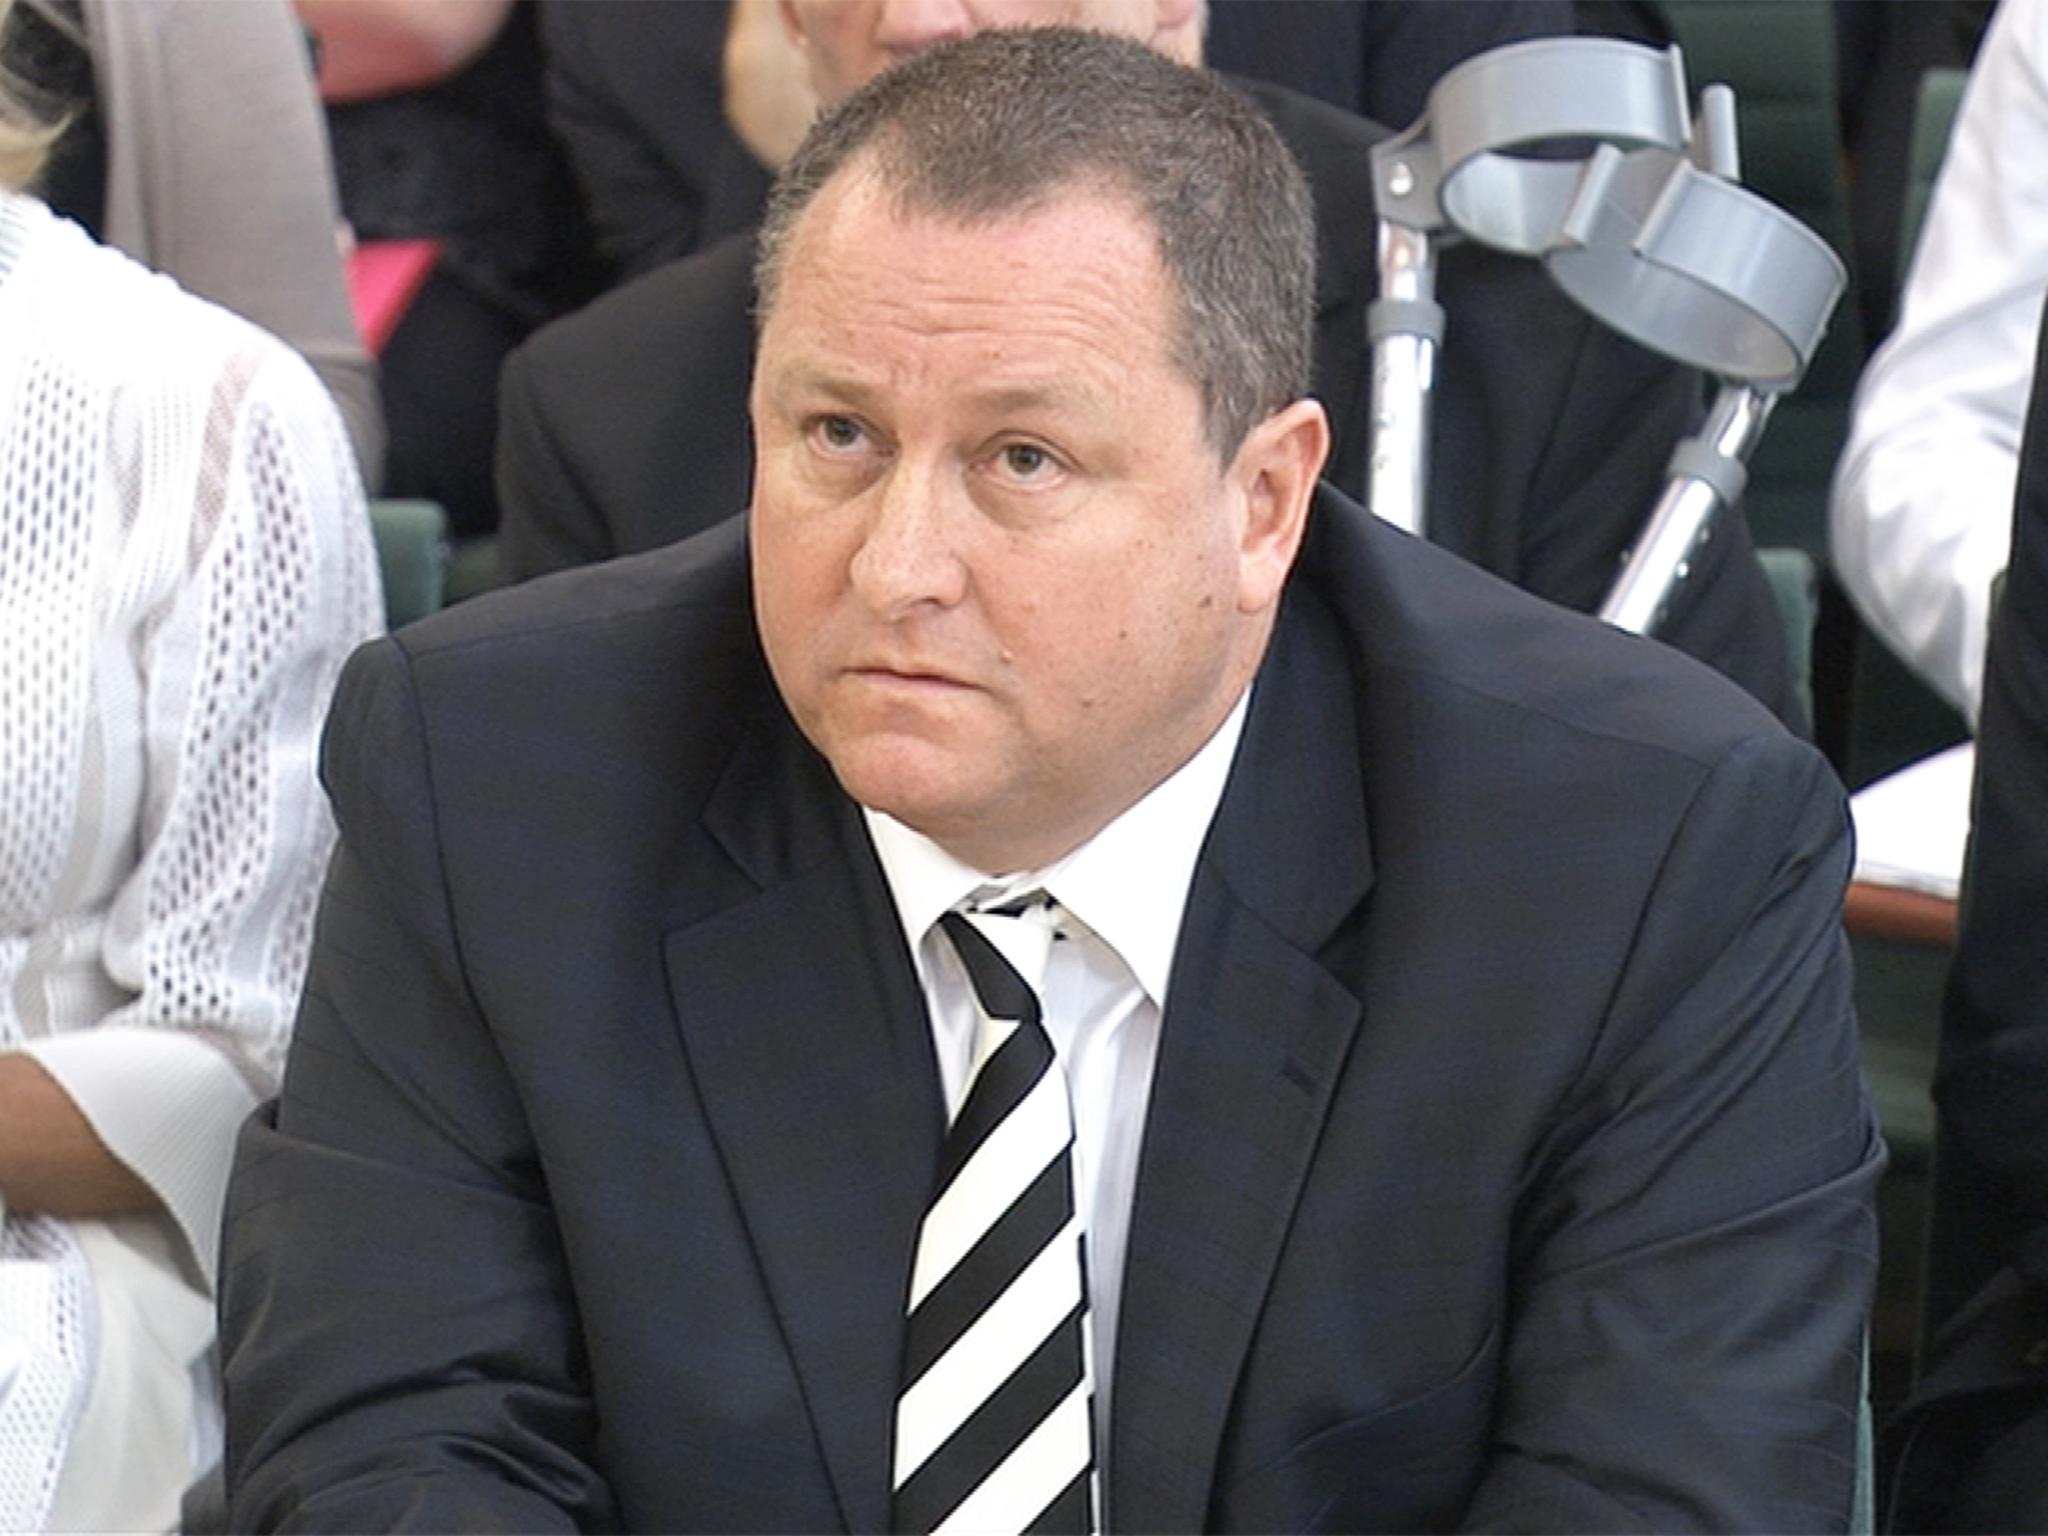 The Sports Direct boss appearing before ministers yesterday